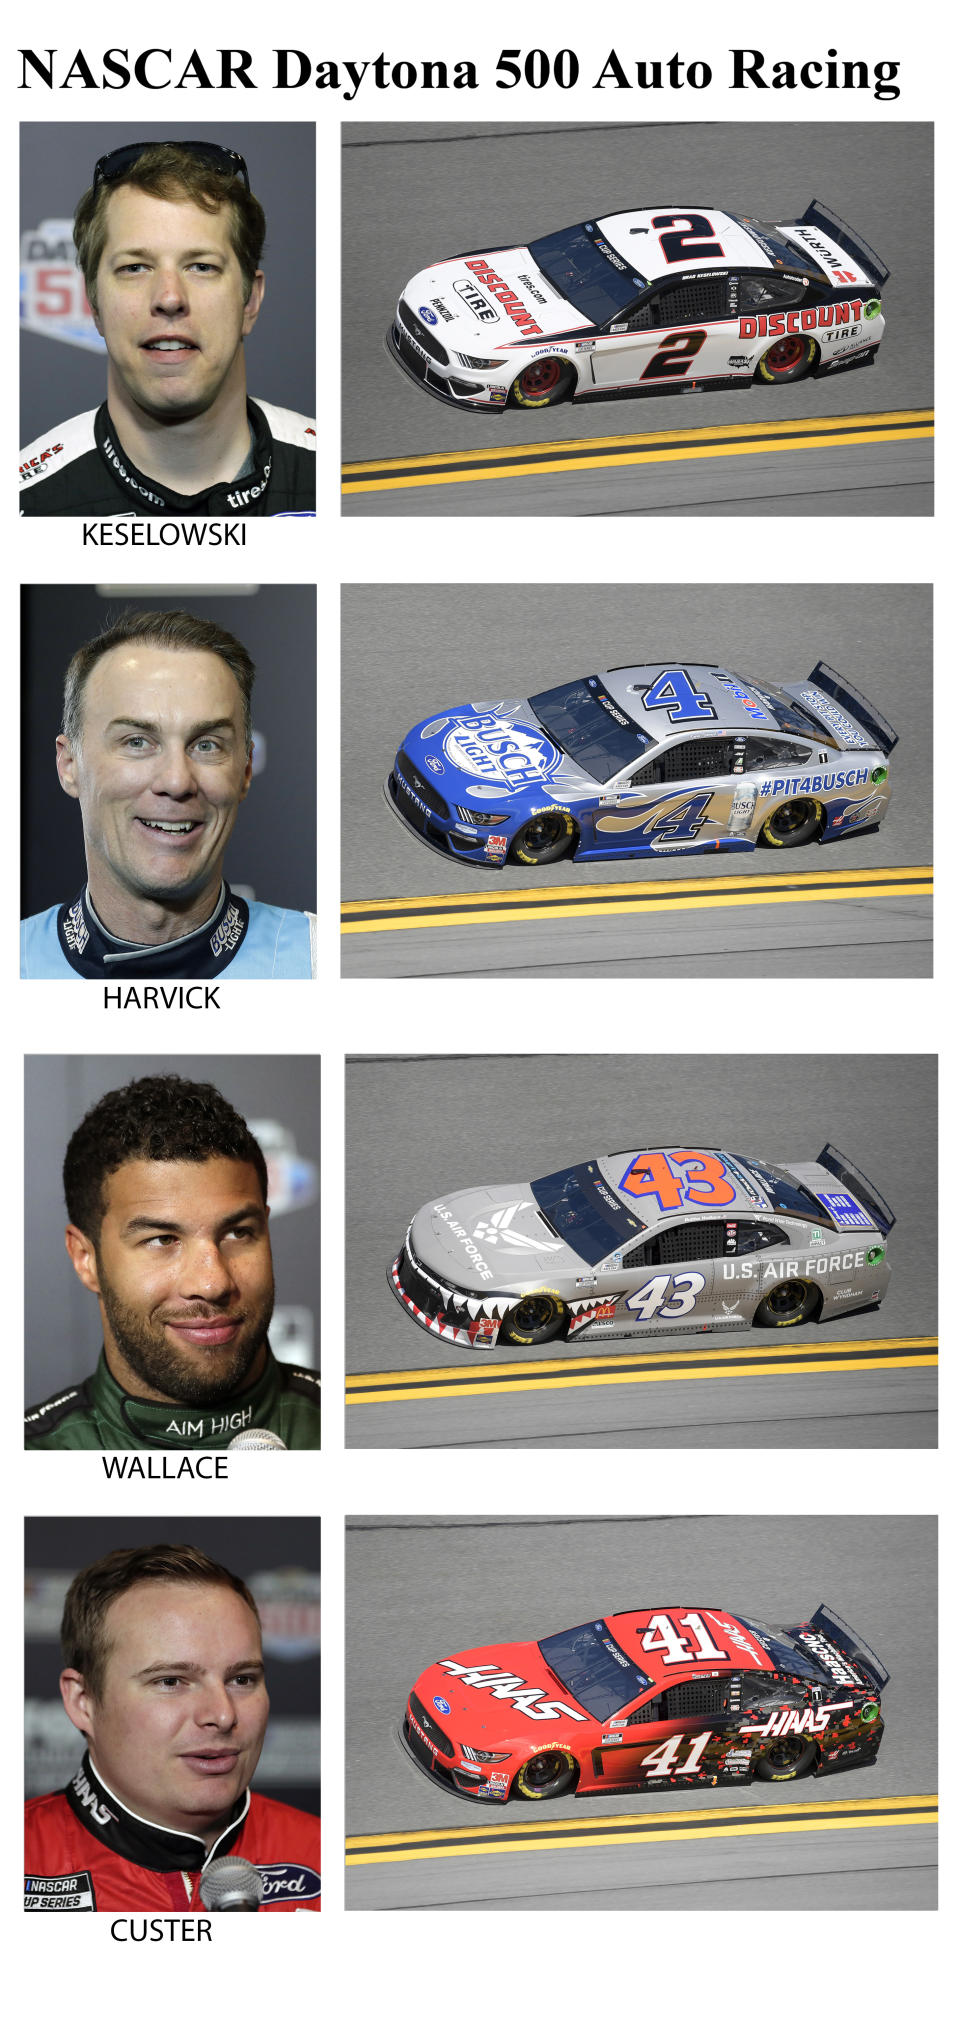 These photos taken in February 2020 show drivers in the starting lineup for Sunday's NASCAR Daytona 500 auto race in Daytona Beach, Fla. From top are Brad Keselowski, starting in the ninth position; Kevin Harvick, tenth position; Bubba Wallace, eleventh position and Cole Custer, twelfth position. (AP Photo)